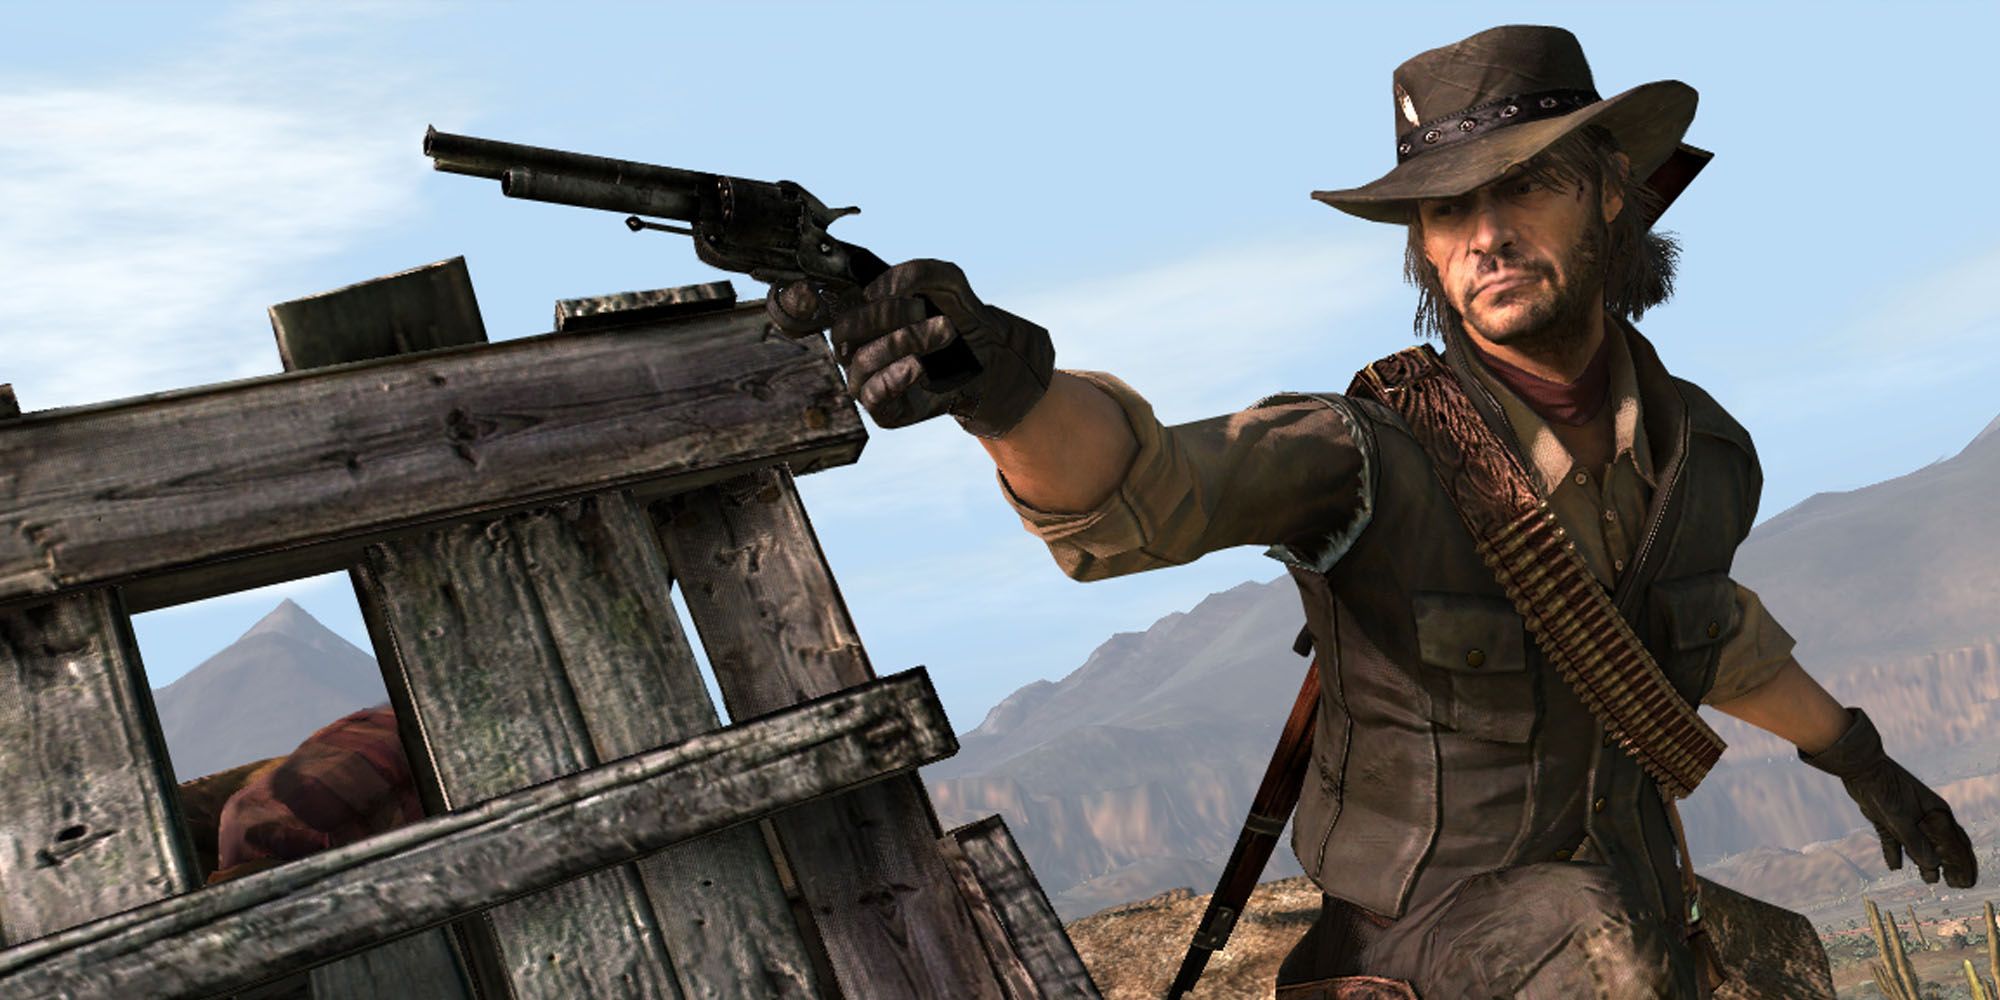 MBG on X: Digital Foundry's analysis of the Red Dead Redemption PS4 Port  confirms it is locked at 30fps with no 60 fps option, even when playing it  on the PS5. It's